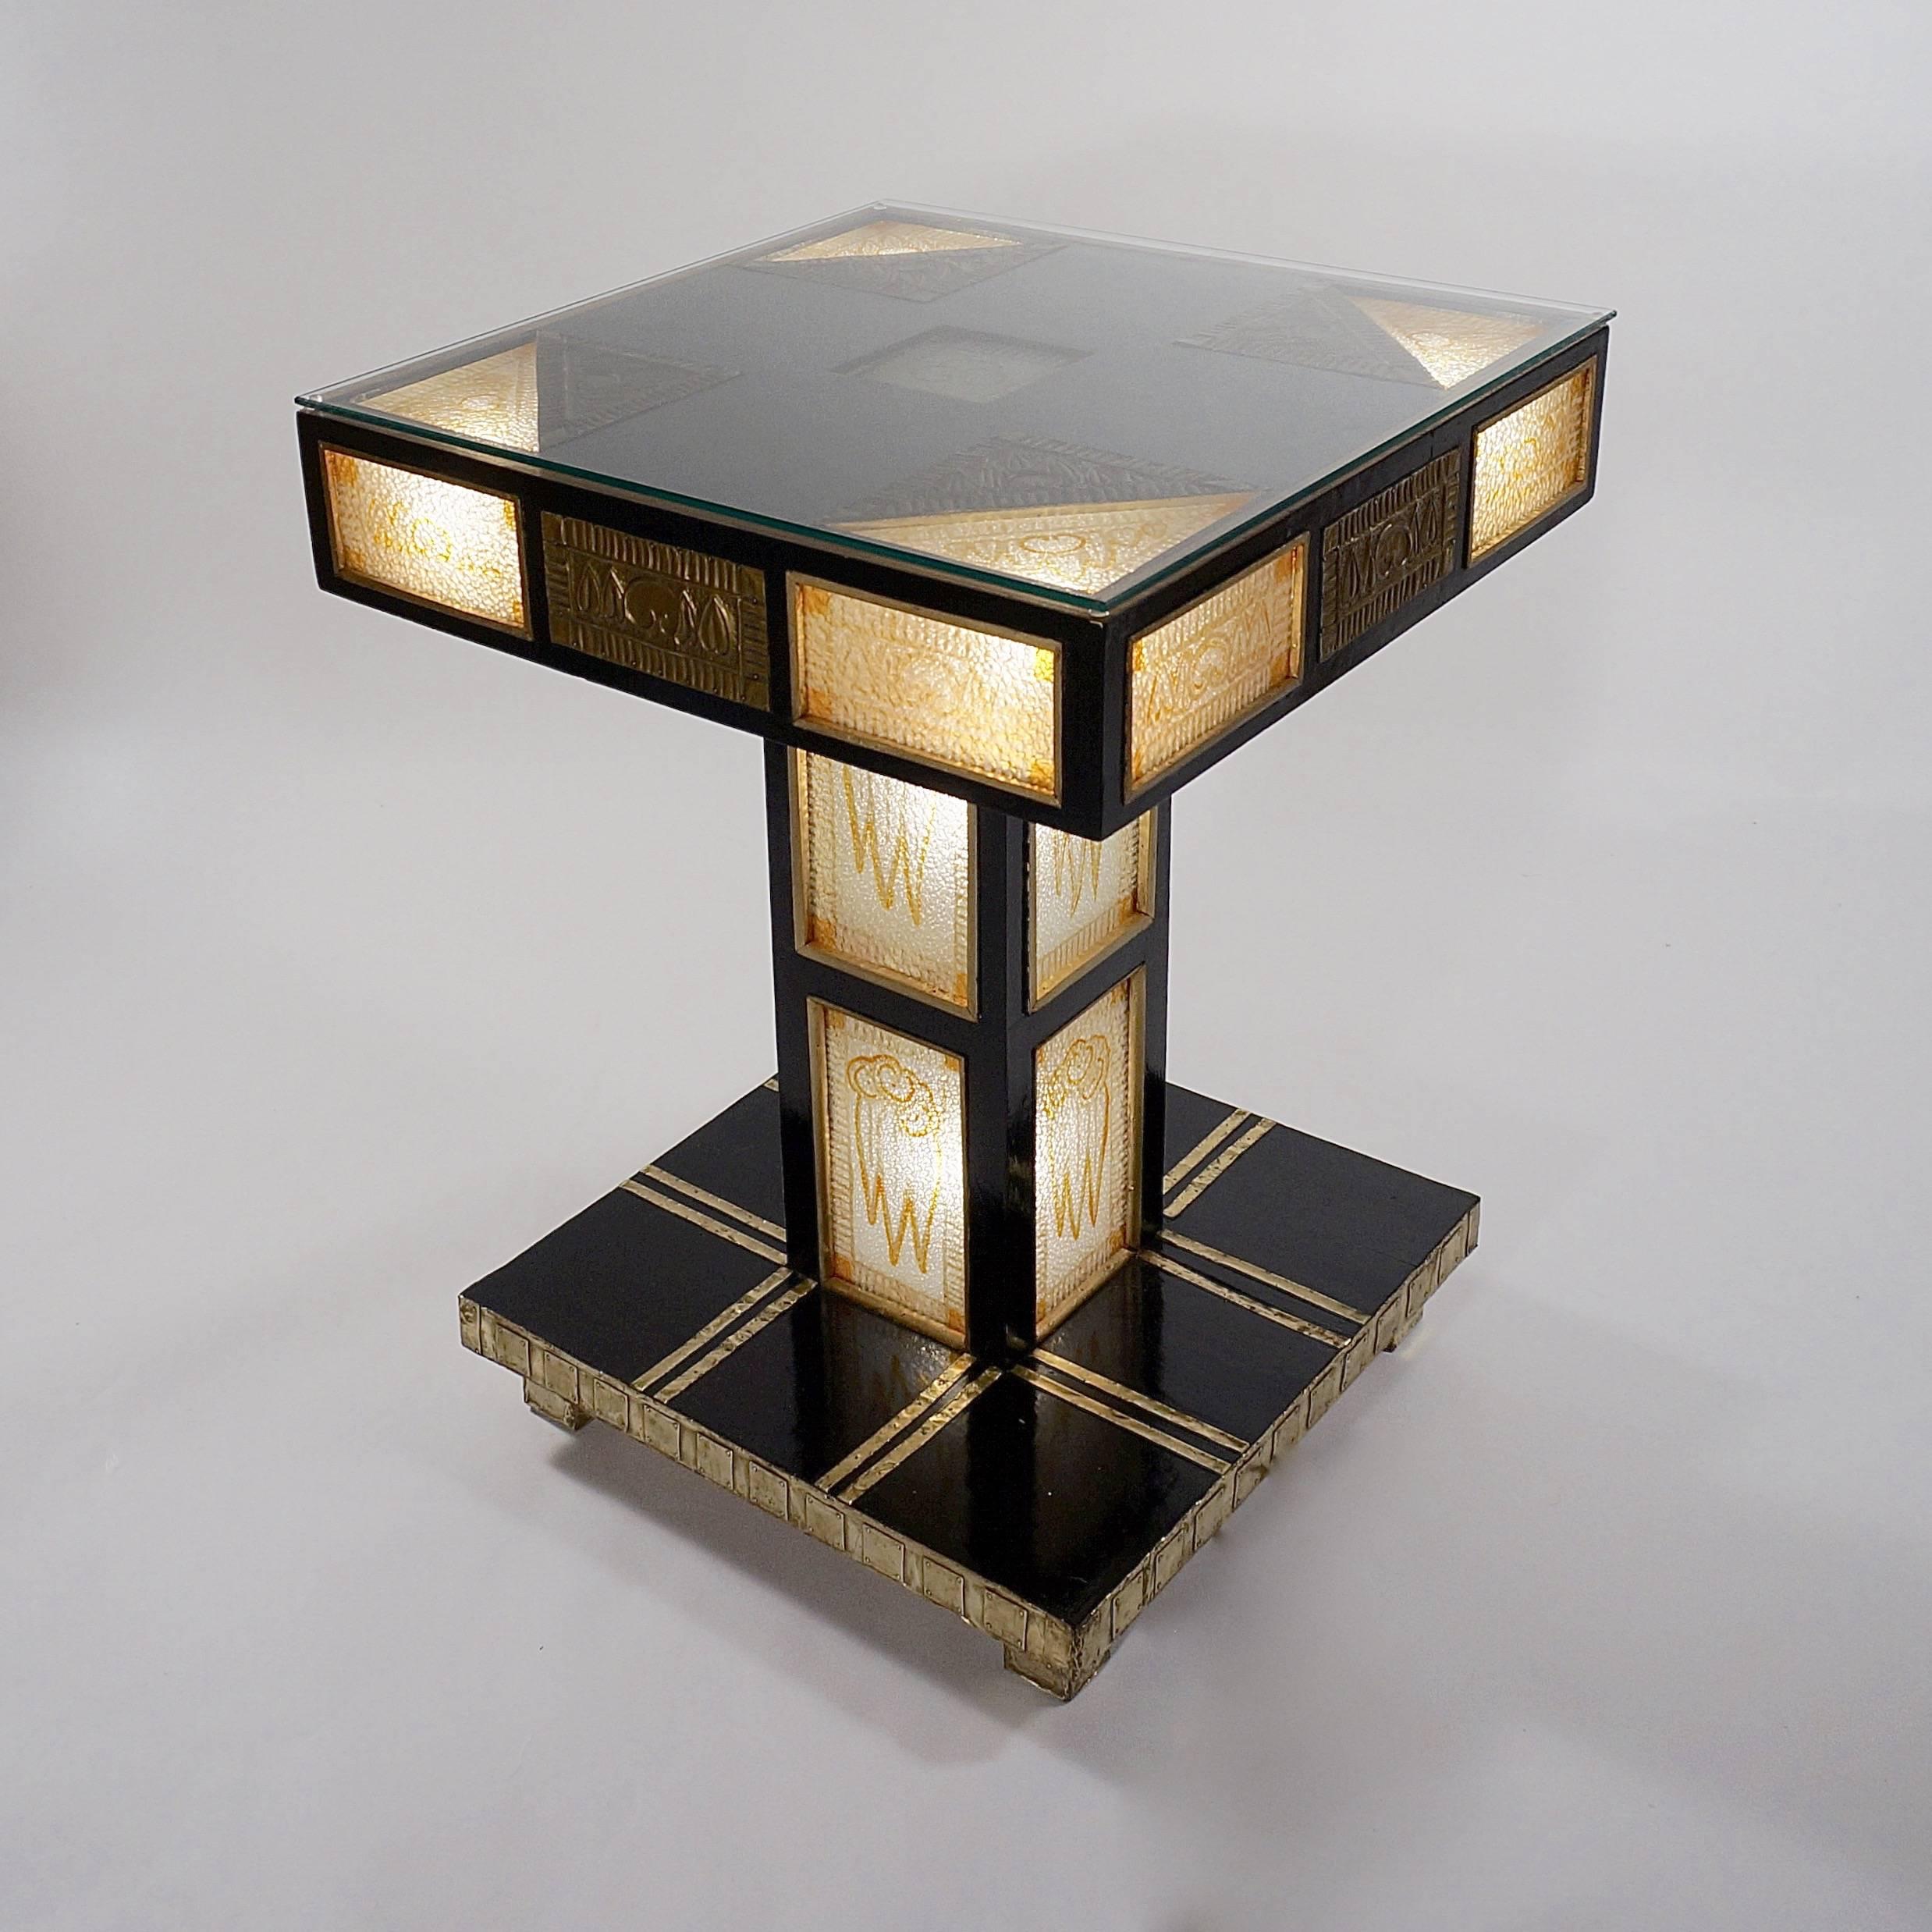 The square top with gold painted textured glass panes and repousse gilt brass mounts set in an ebonized wooden frame supported by a column with glazed panels on a square plinth base. Wired for electricity,

Vienna, circa 1910.